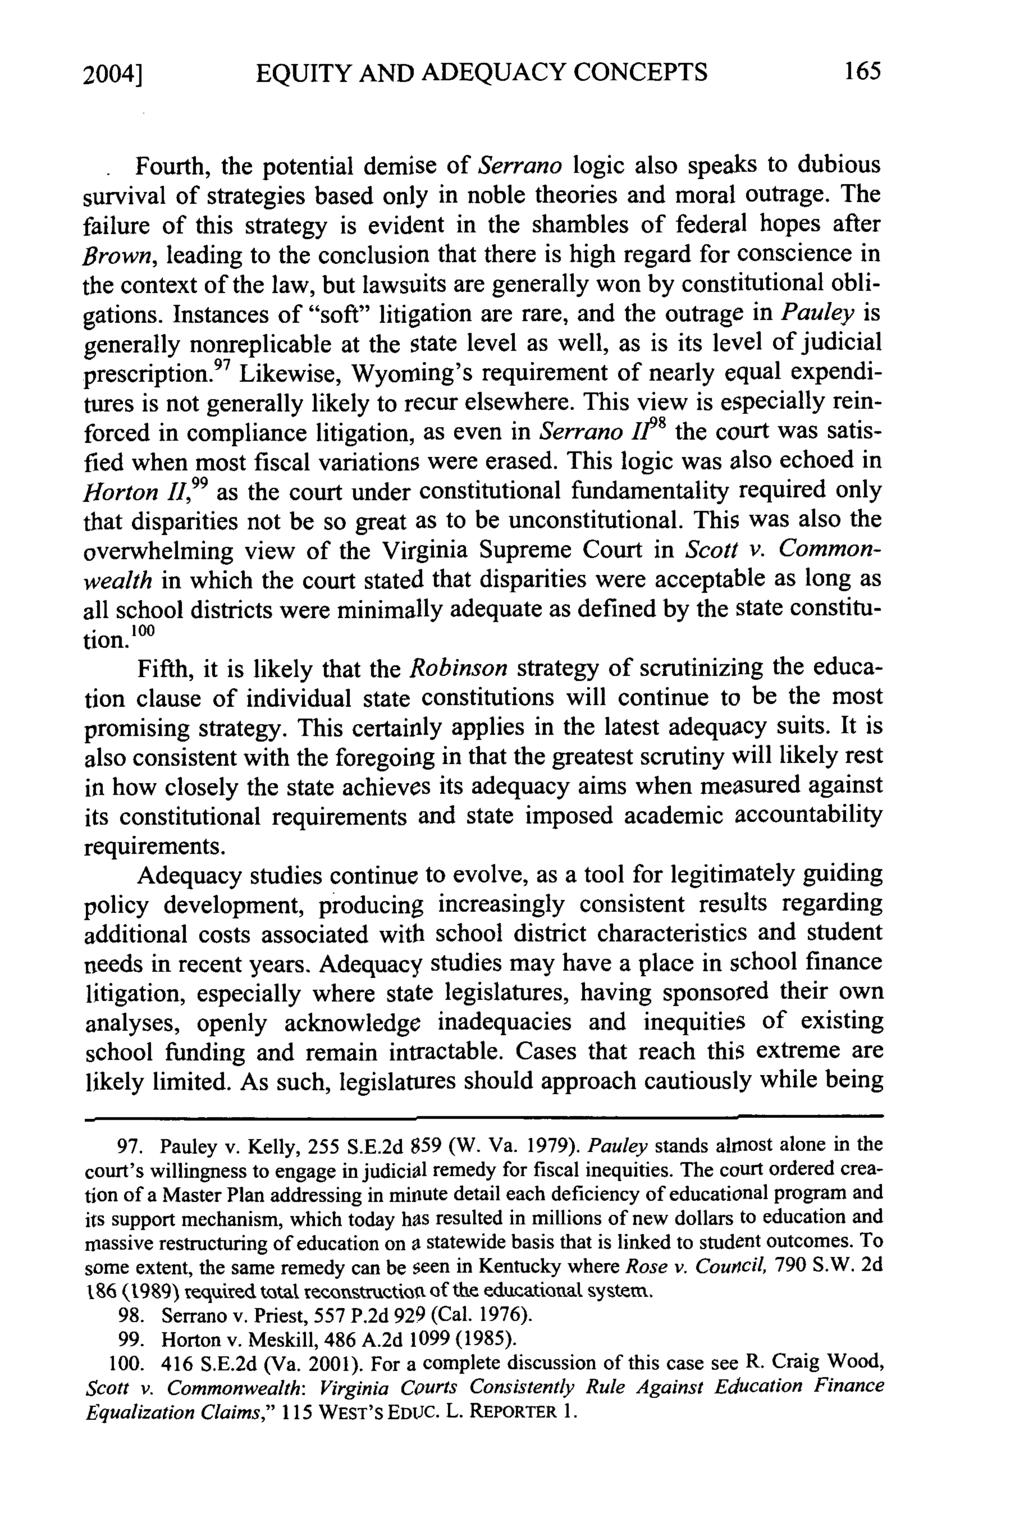 2004] EQUITY AND ADEQUACY CONCEPTS. Fourth, the potential demise of Serrano logic also speaks to dubious survival of strategies based only in noble theories and moral outrage.